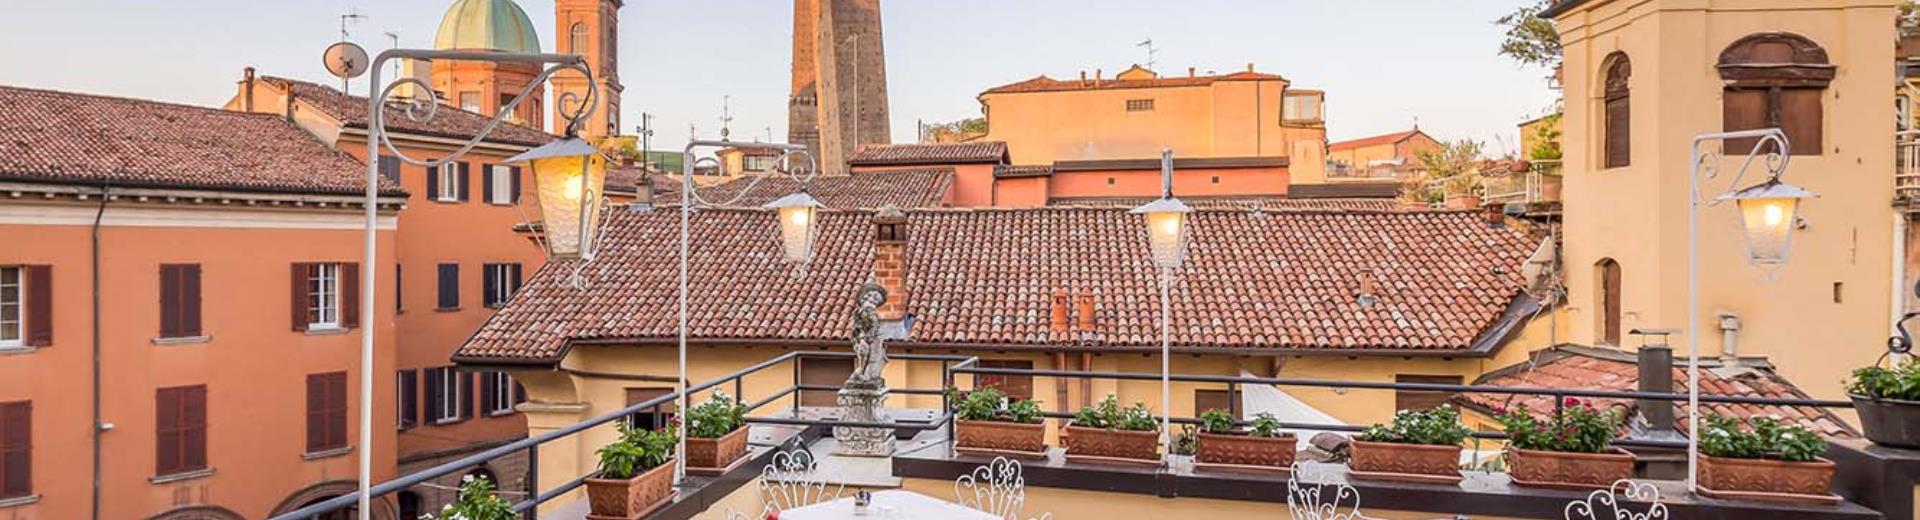 The magnificent terrace on the second floor of the Hotel San Donato Bologna